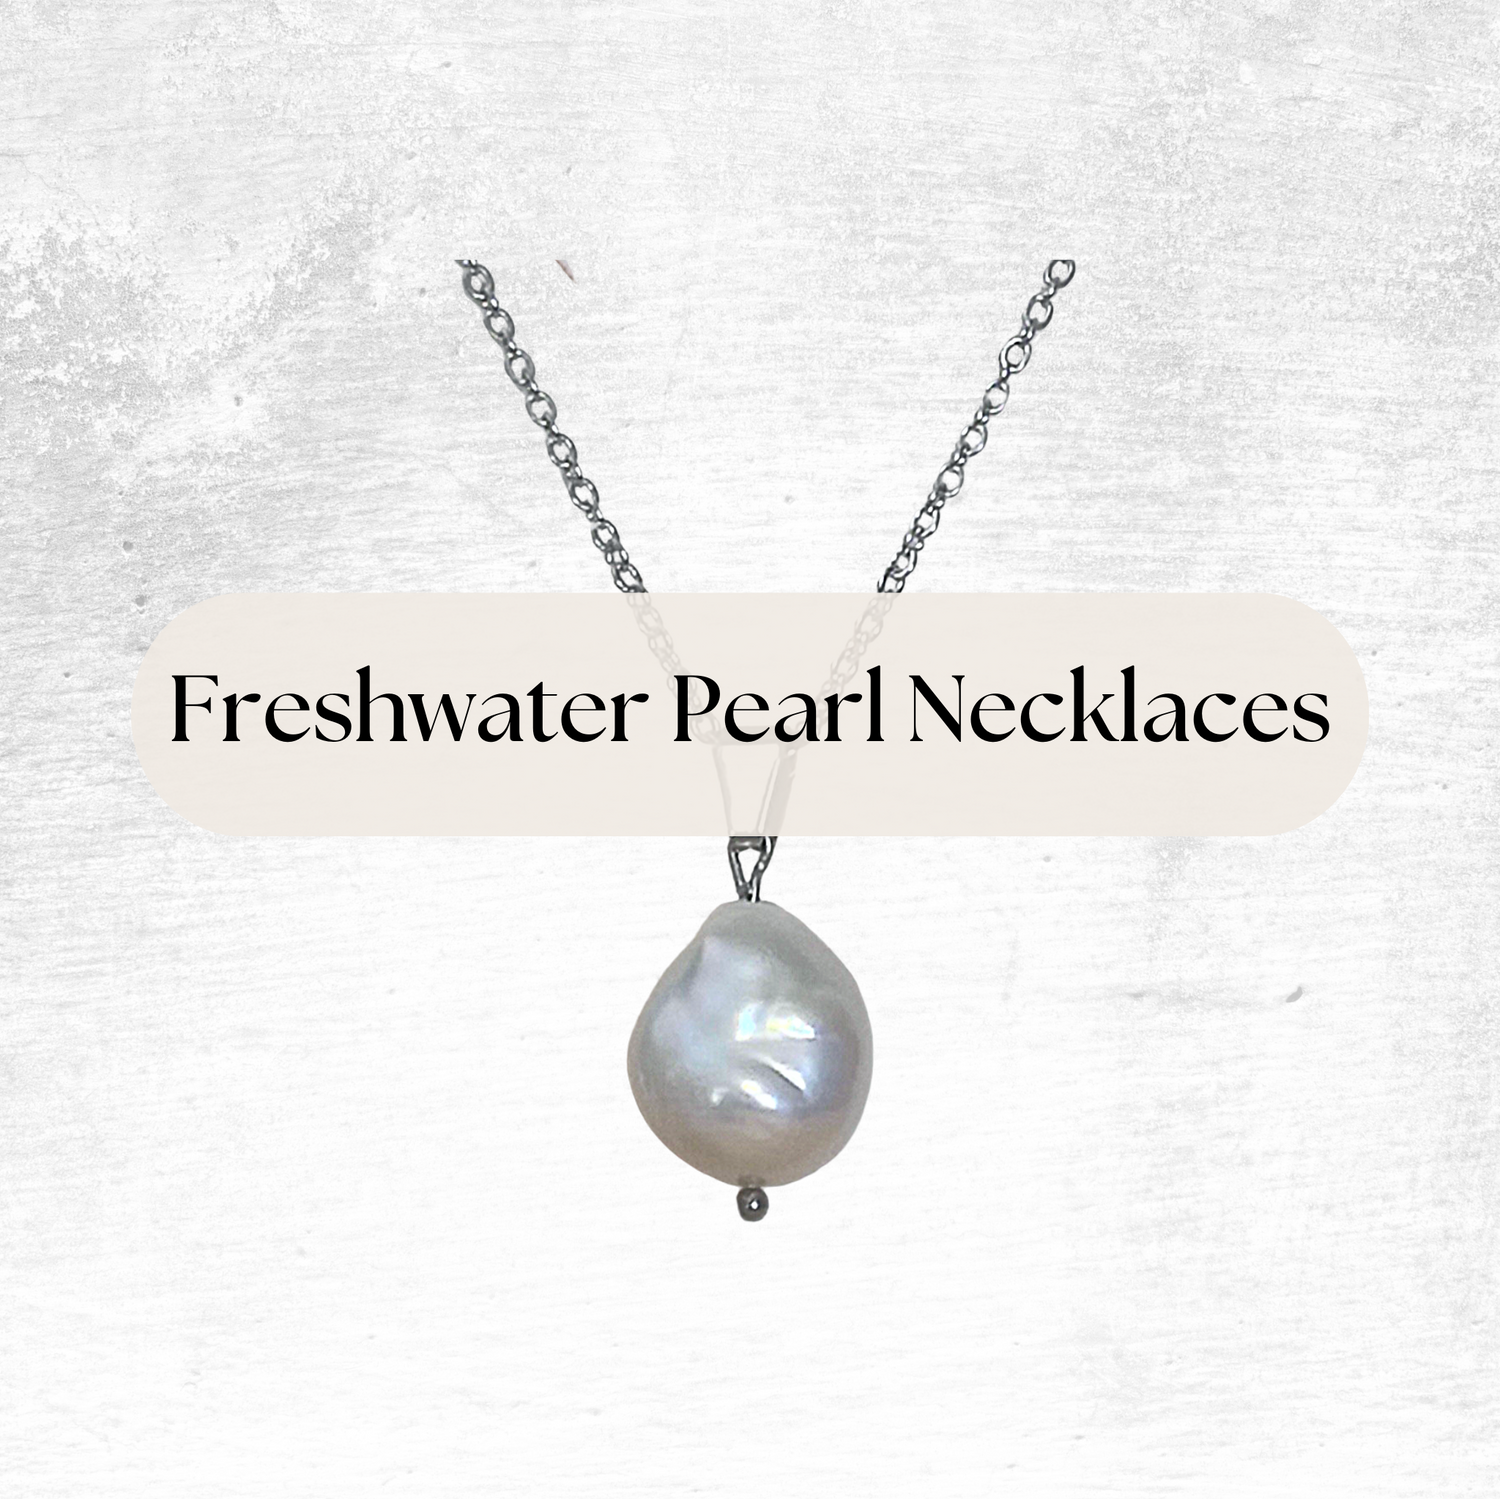 Mark Your Style with Luxury Pearl Necklaces. From boardroom chic to black tie affairs, a freshwater pearl necklace can enhance any look.